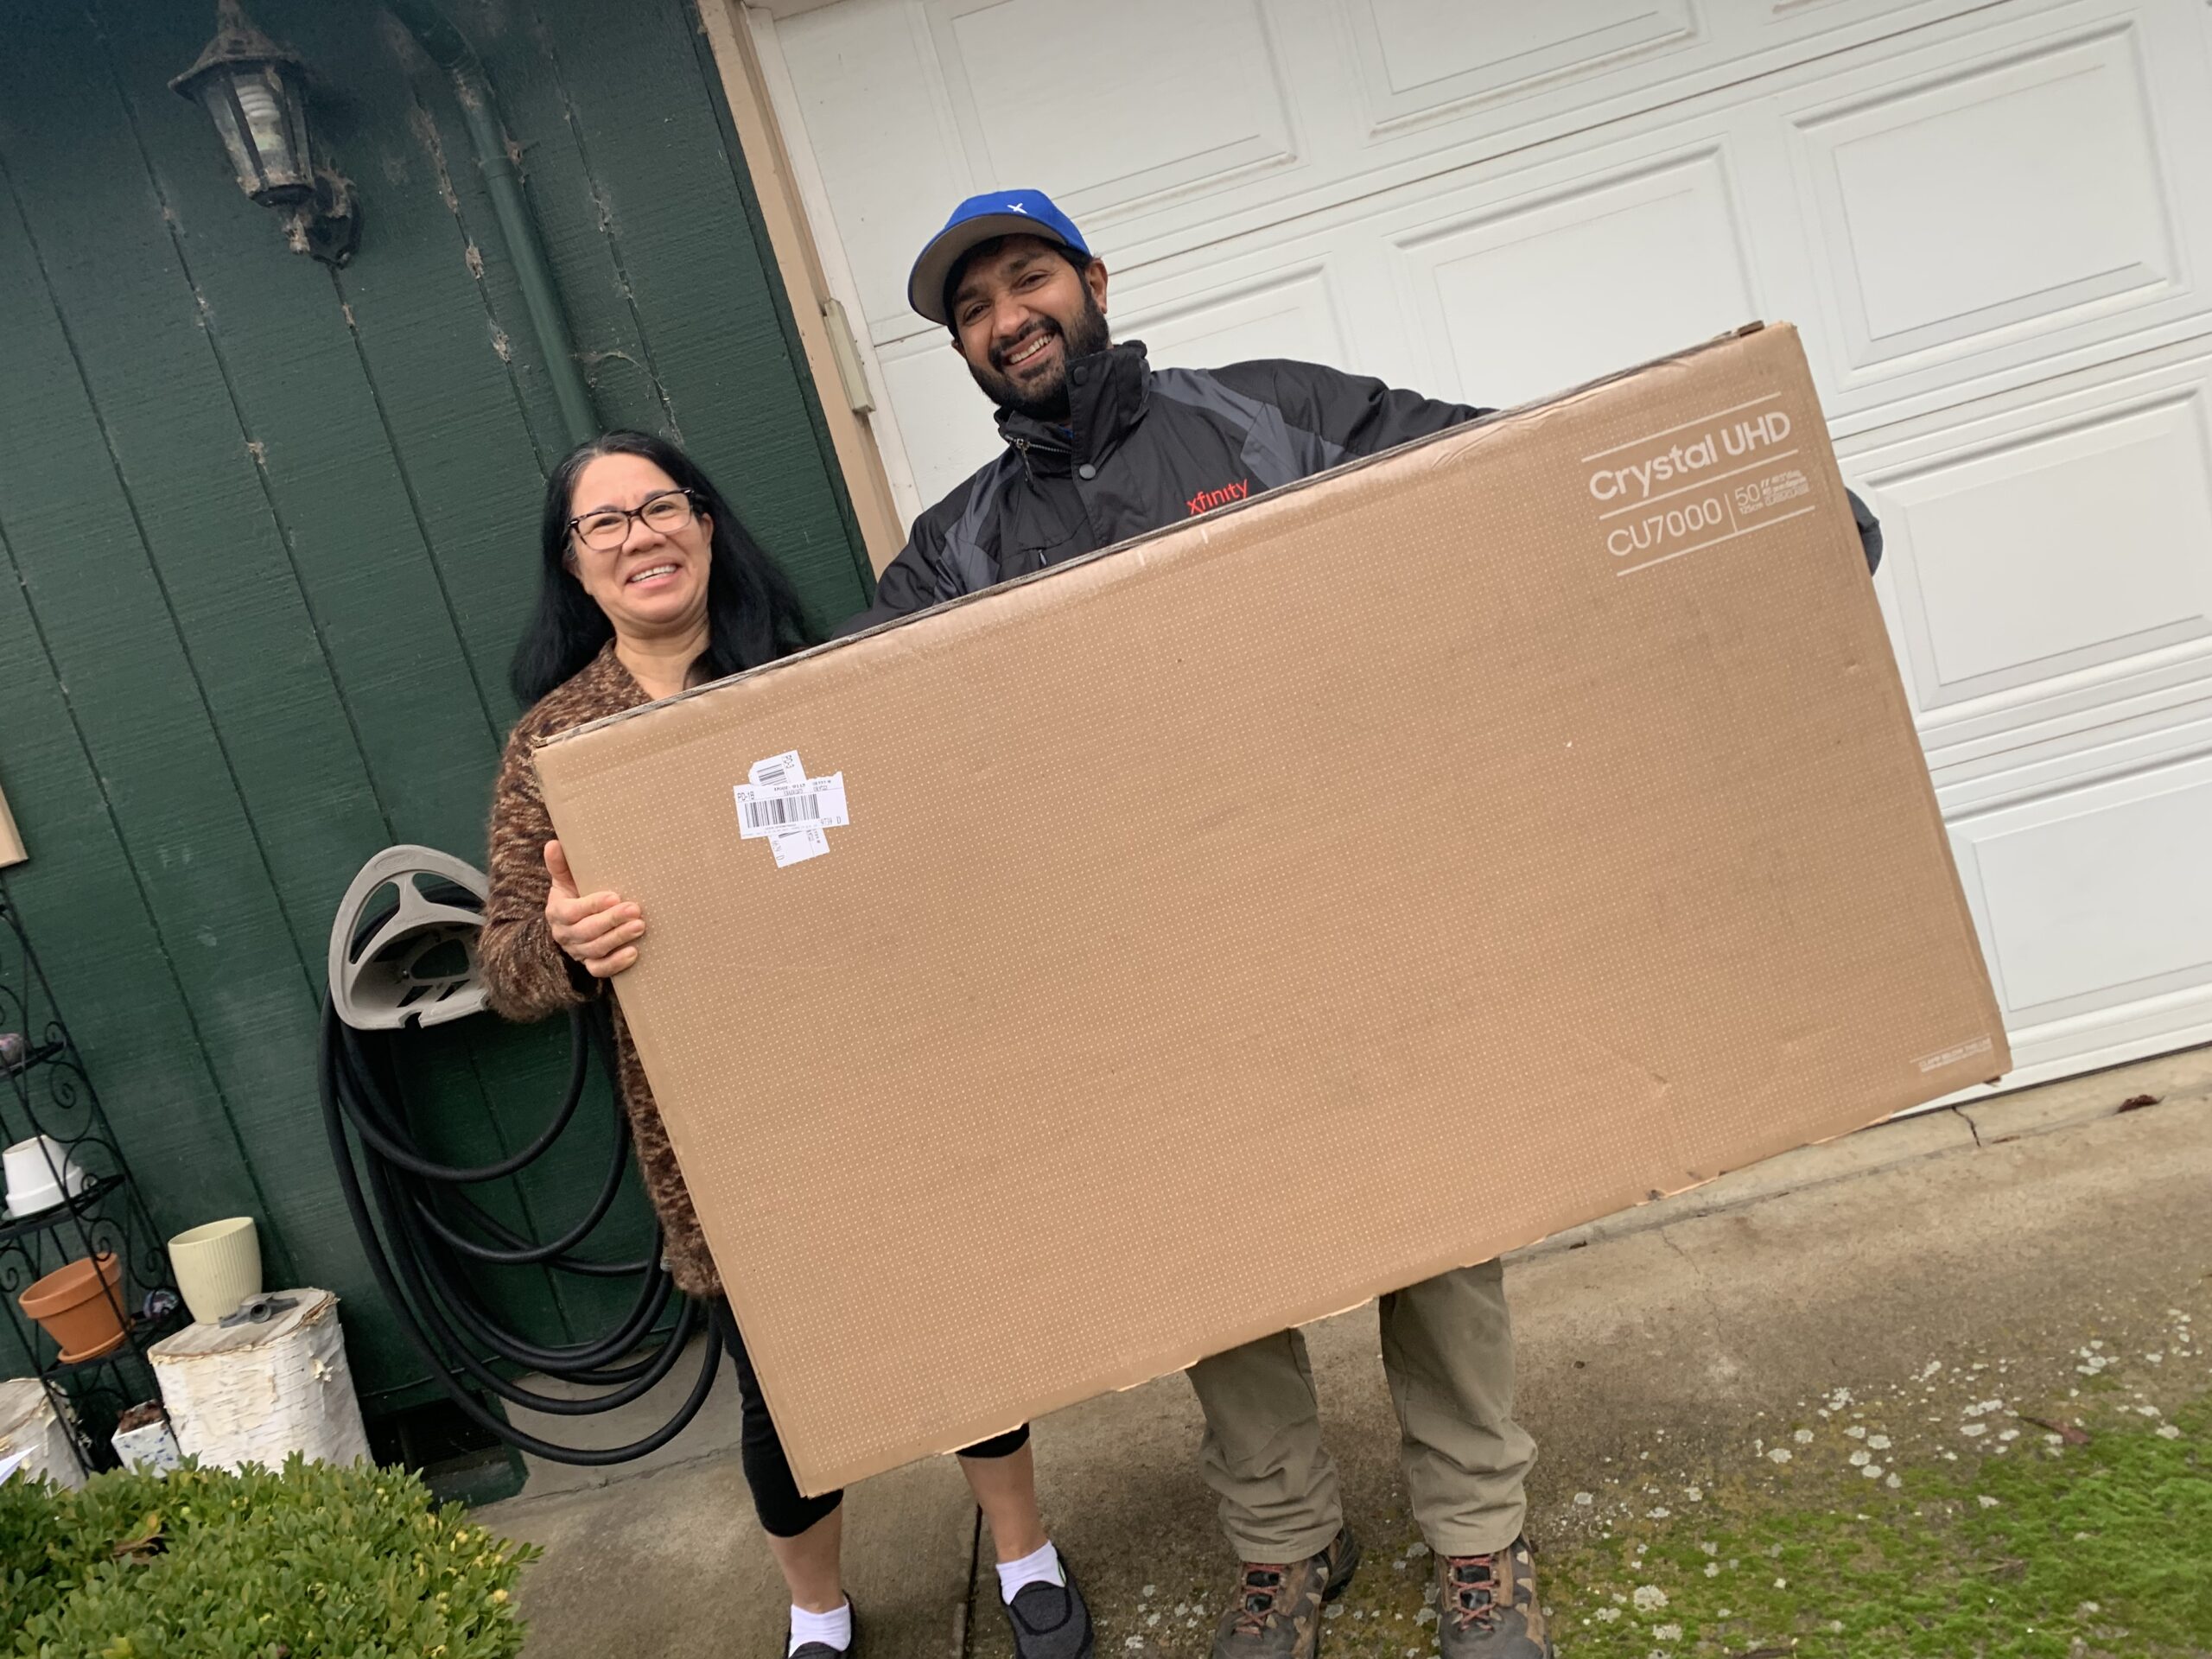 A Comcast customer with a TV outside their home with a Comcast employee.